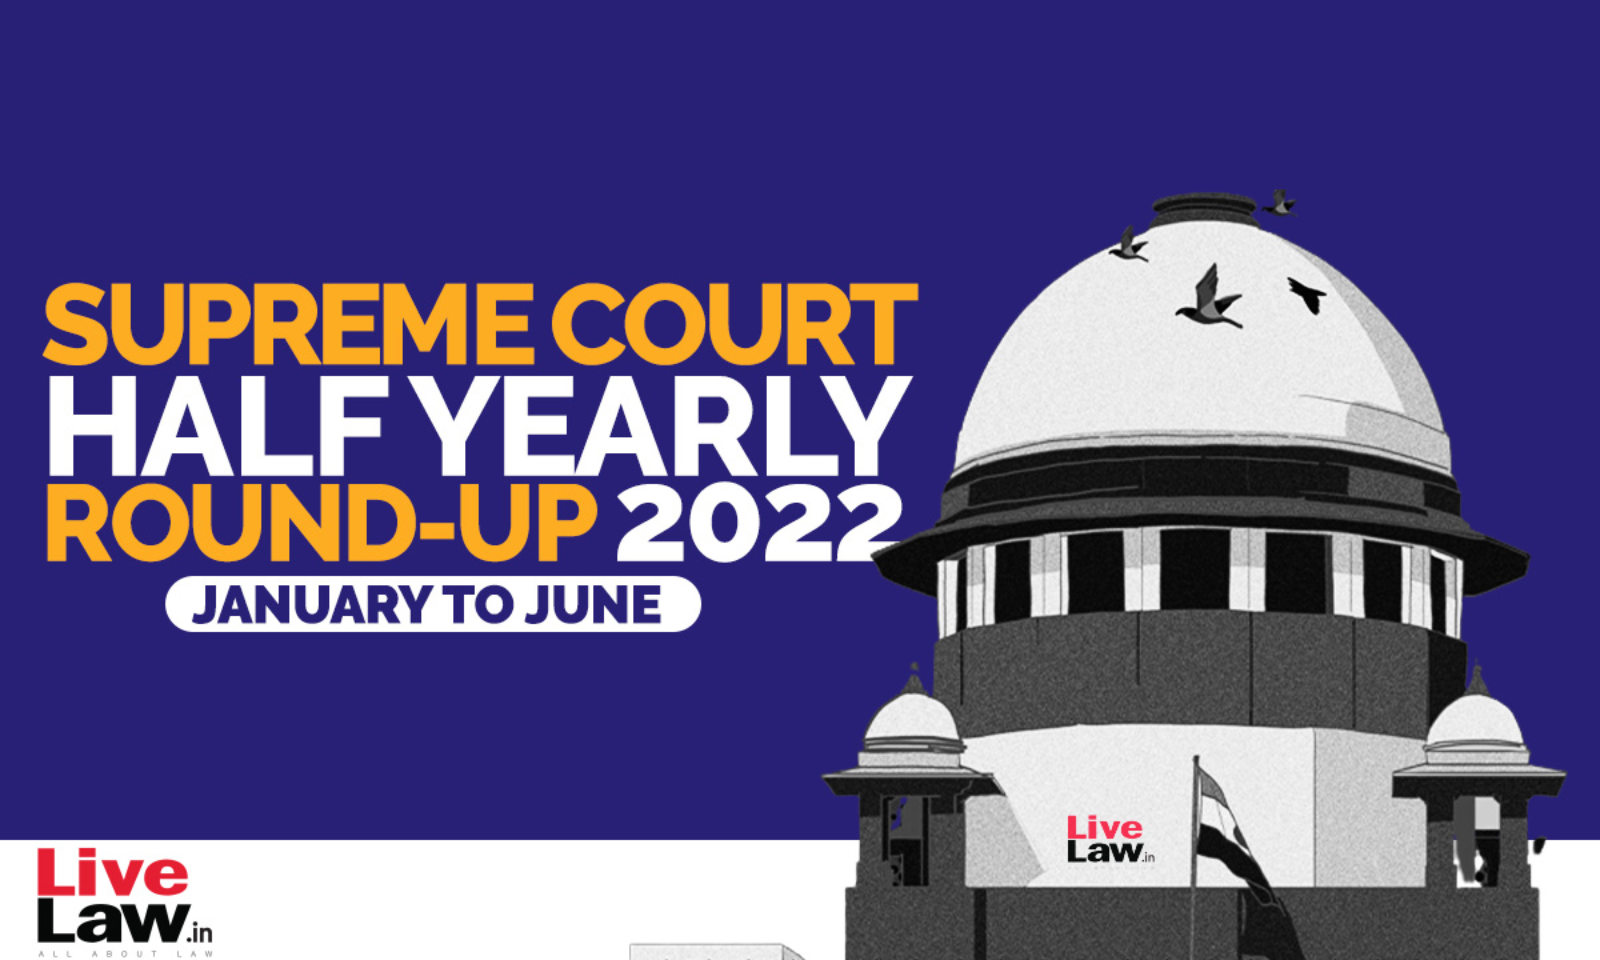 Sss Xxx Cc Video - Supreme Court Half Yearly Round-Up -[January To June]